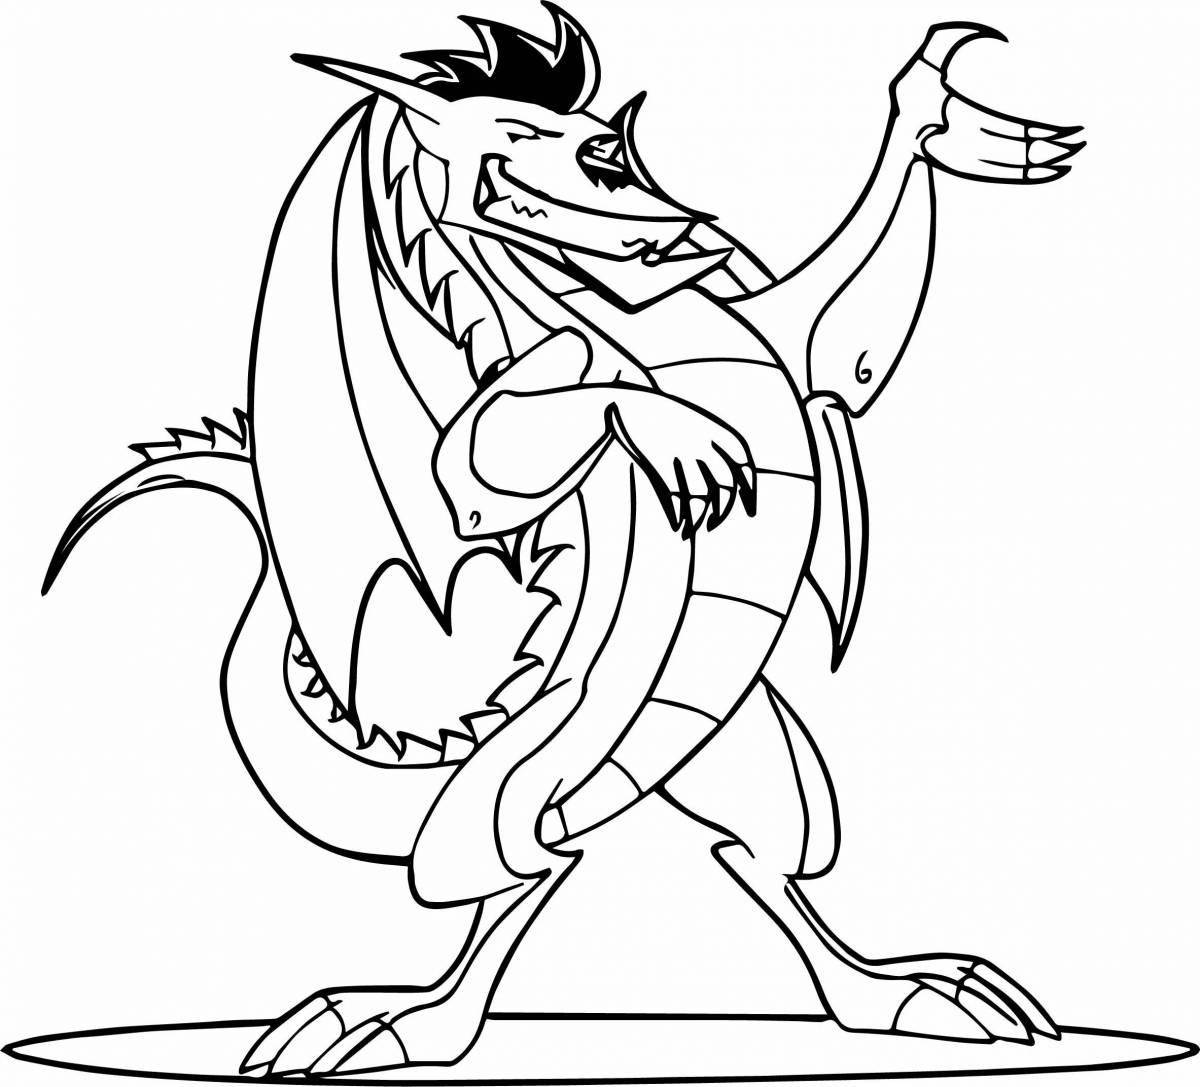 Coloring page deluxe american dragon